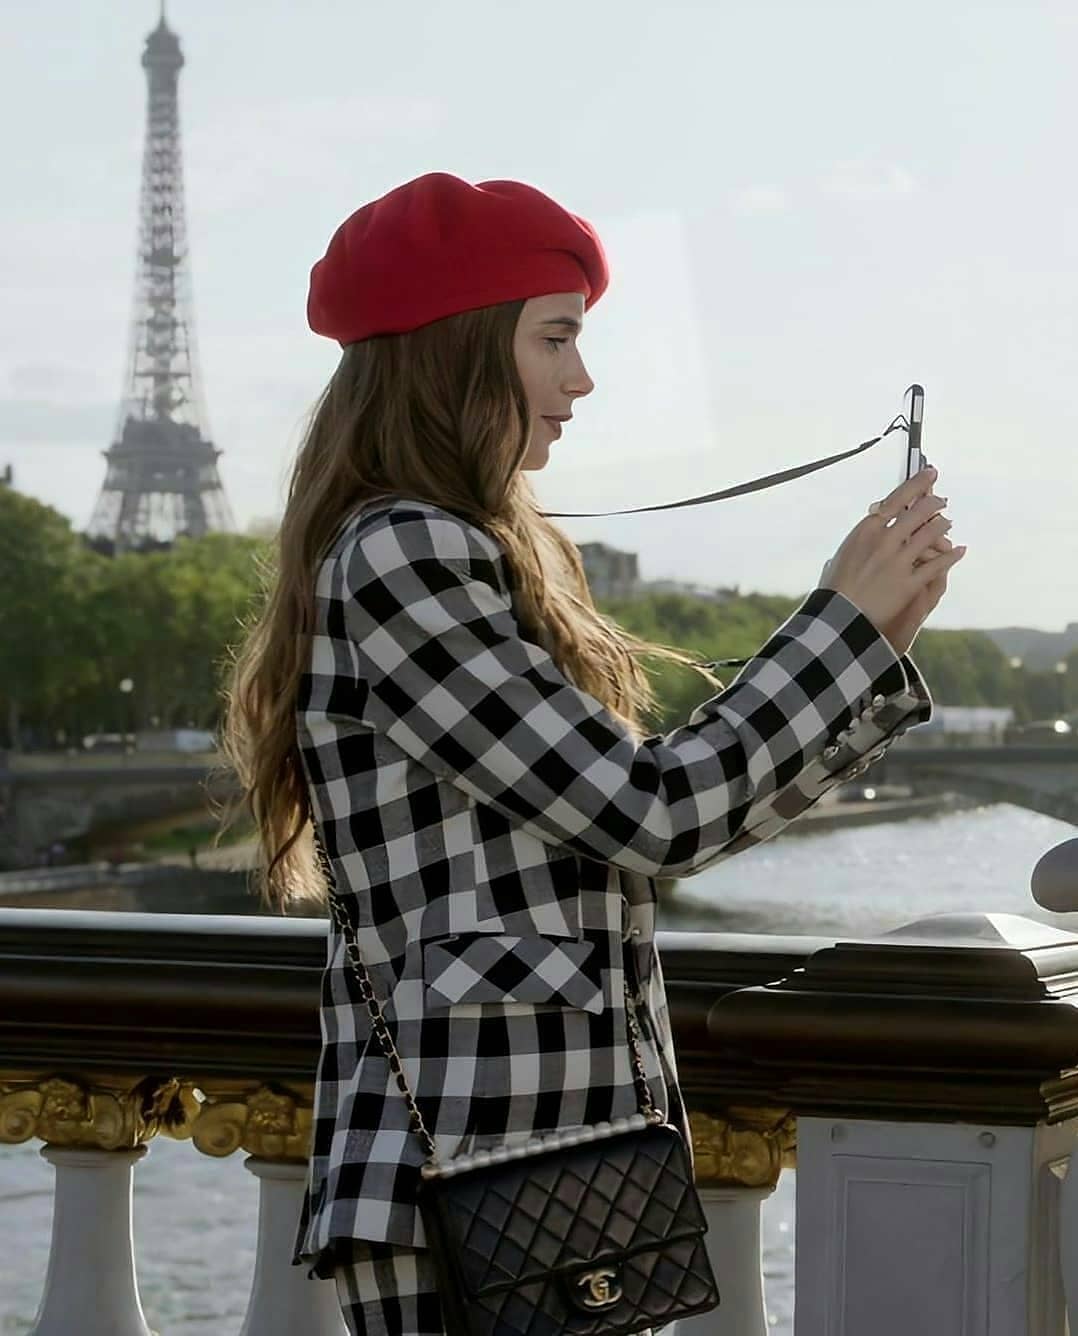 lily collins in Emily in Paris - Neomag.